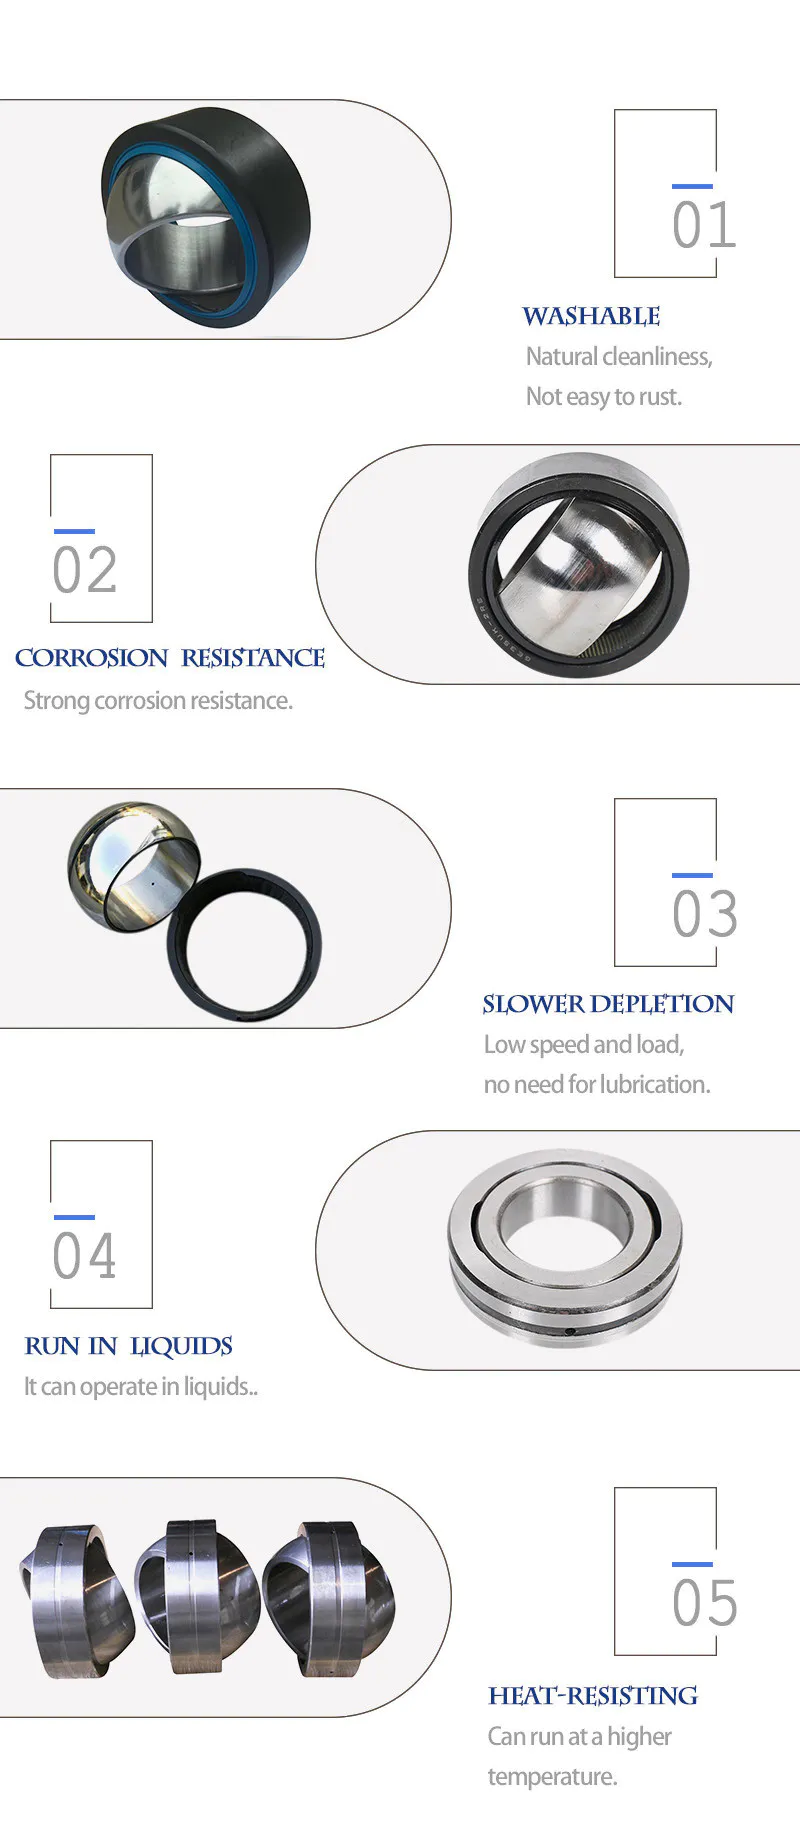 low-cost spherical taper roller bearing custom free delivery